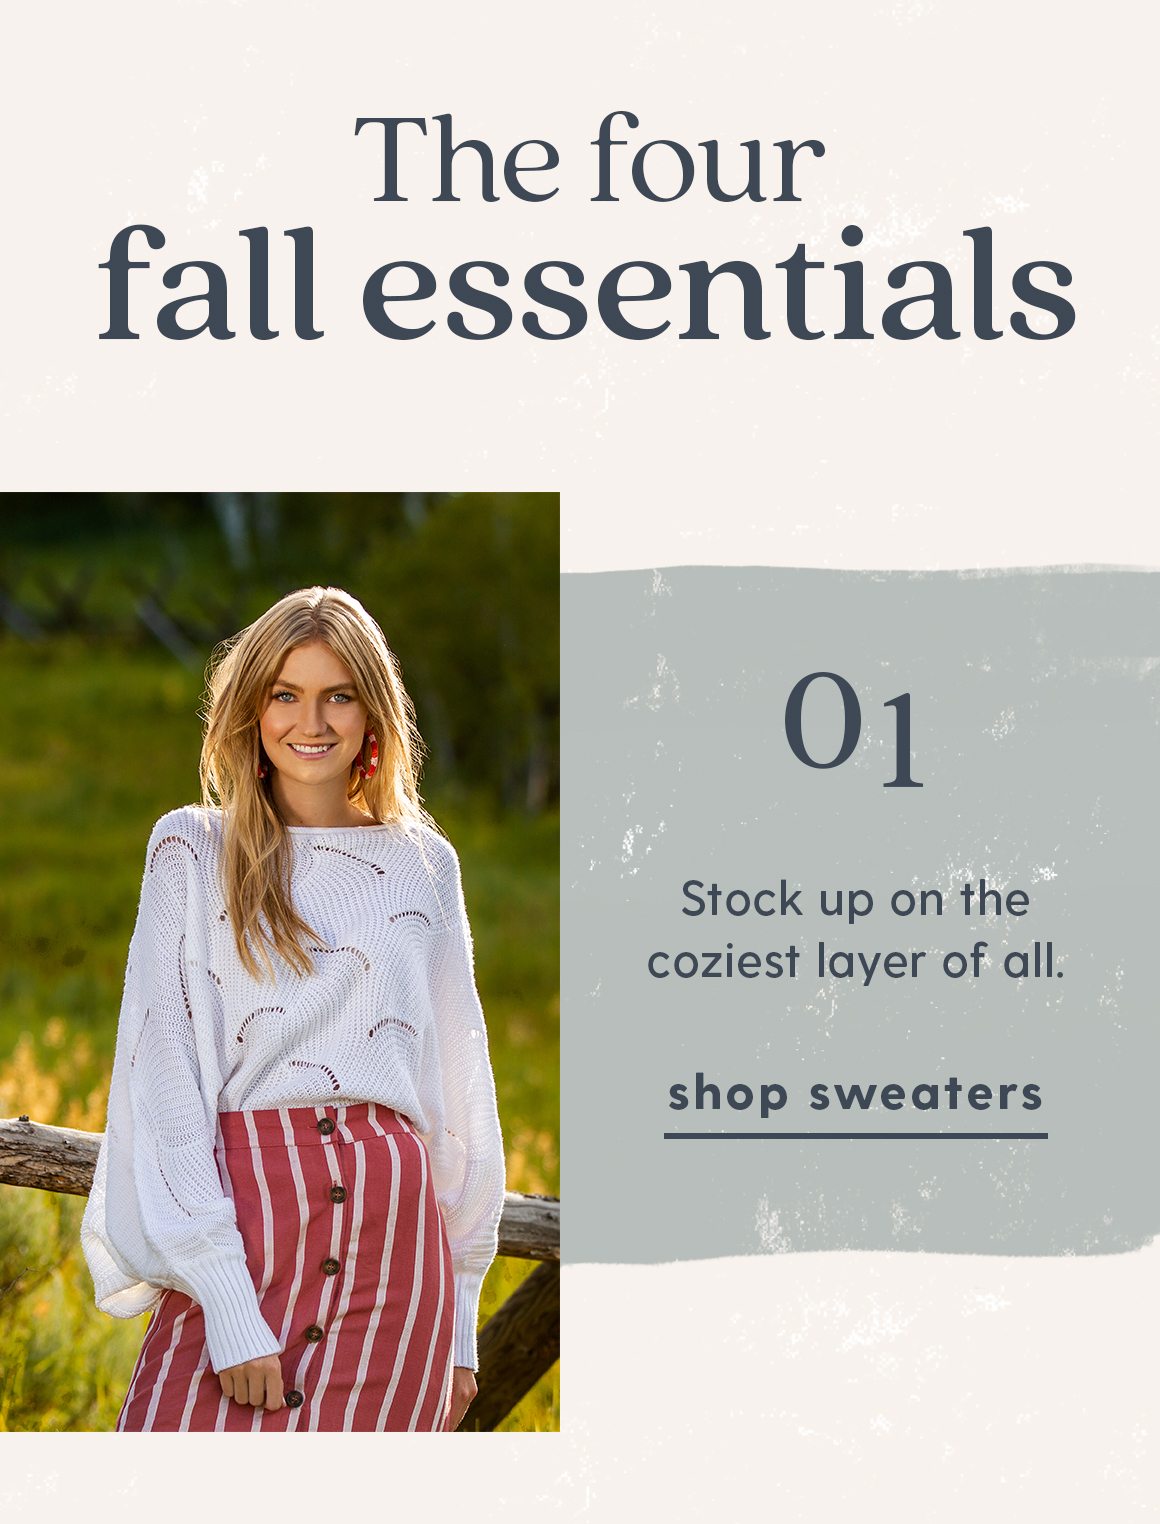 The four fall essentials. Stock up on the coziest layer of all. Shop Sweaters.